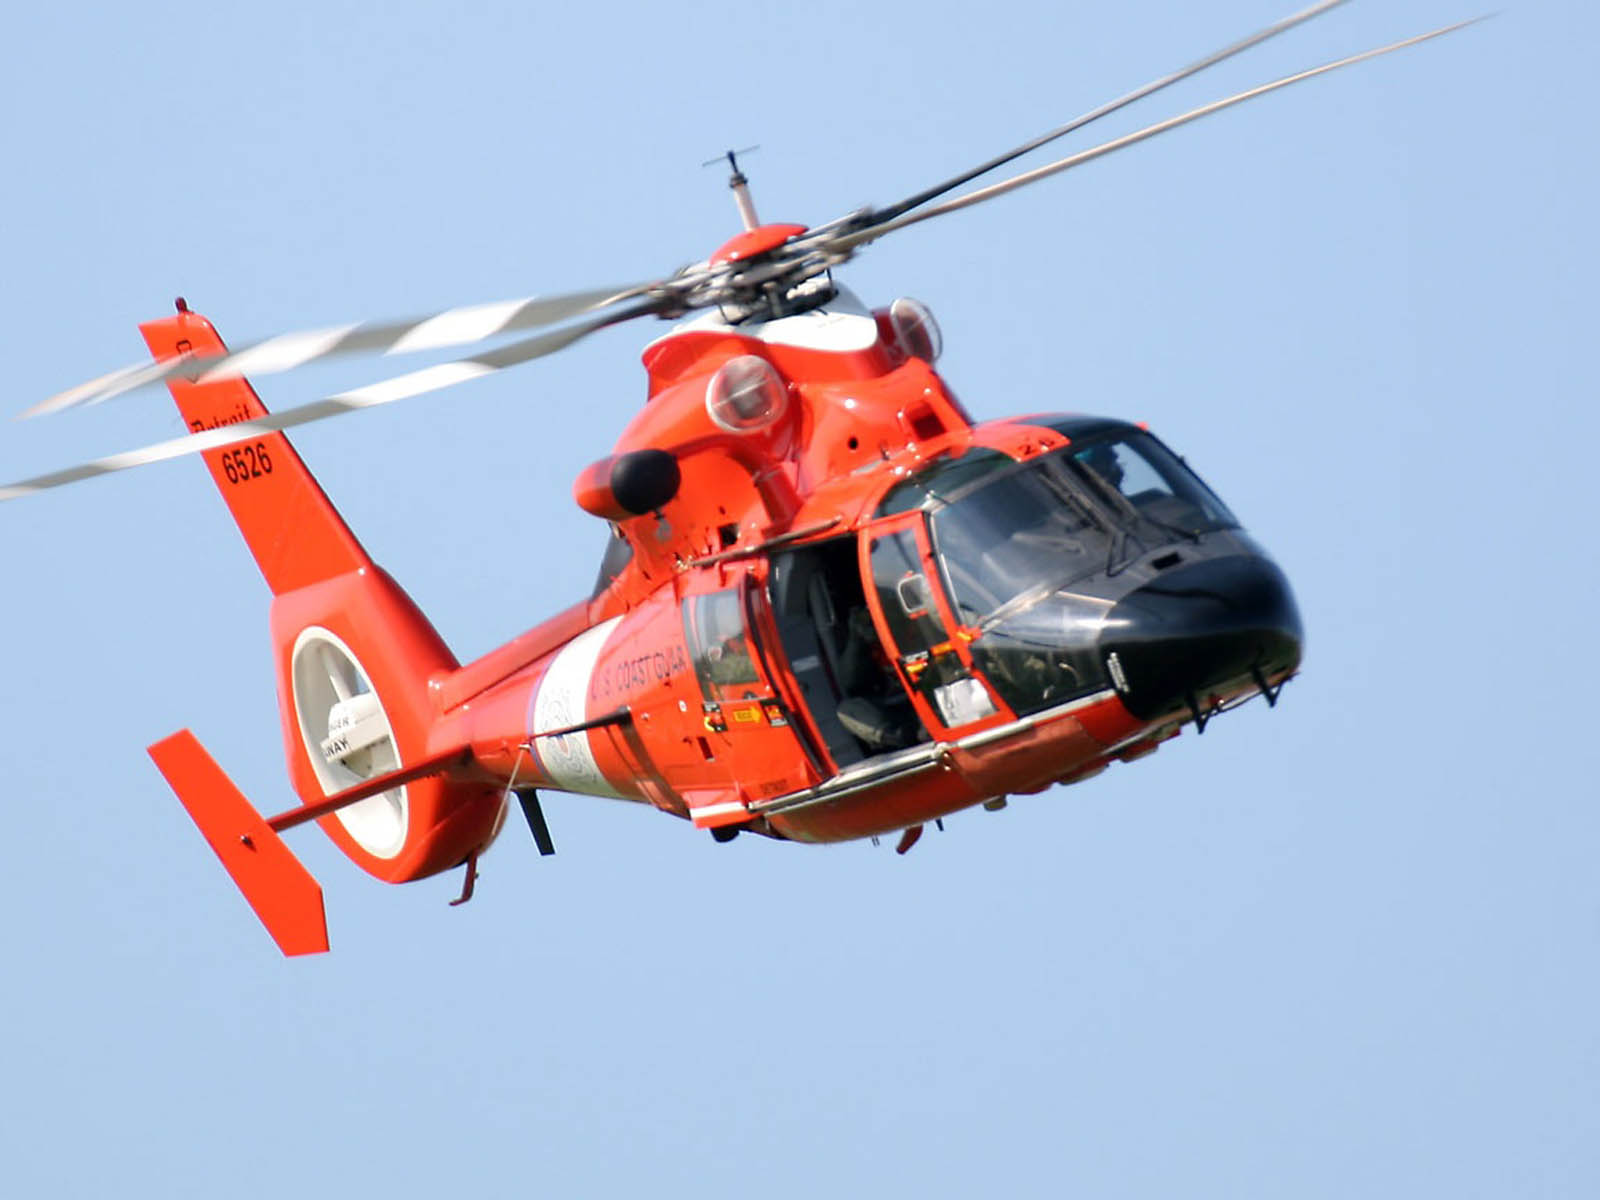 us coast guard helicopter wallpapers hh 65 dolphin us coast guard